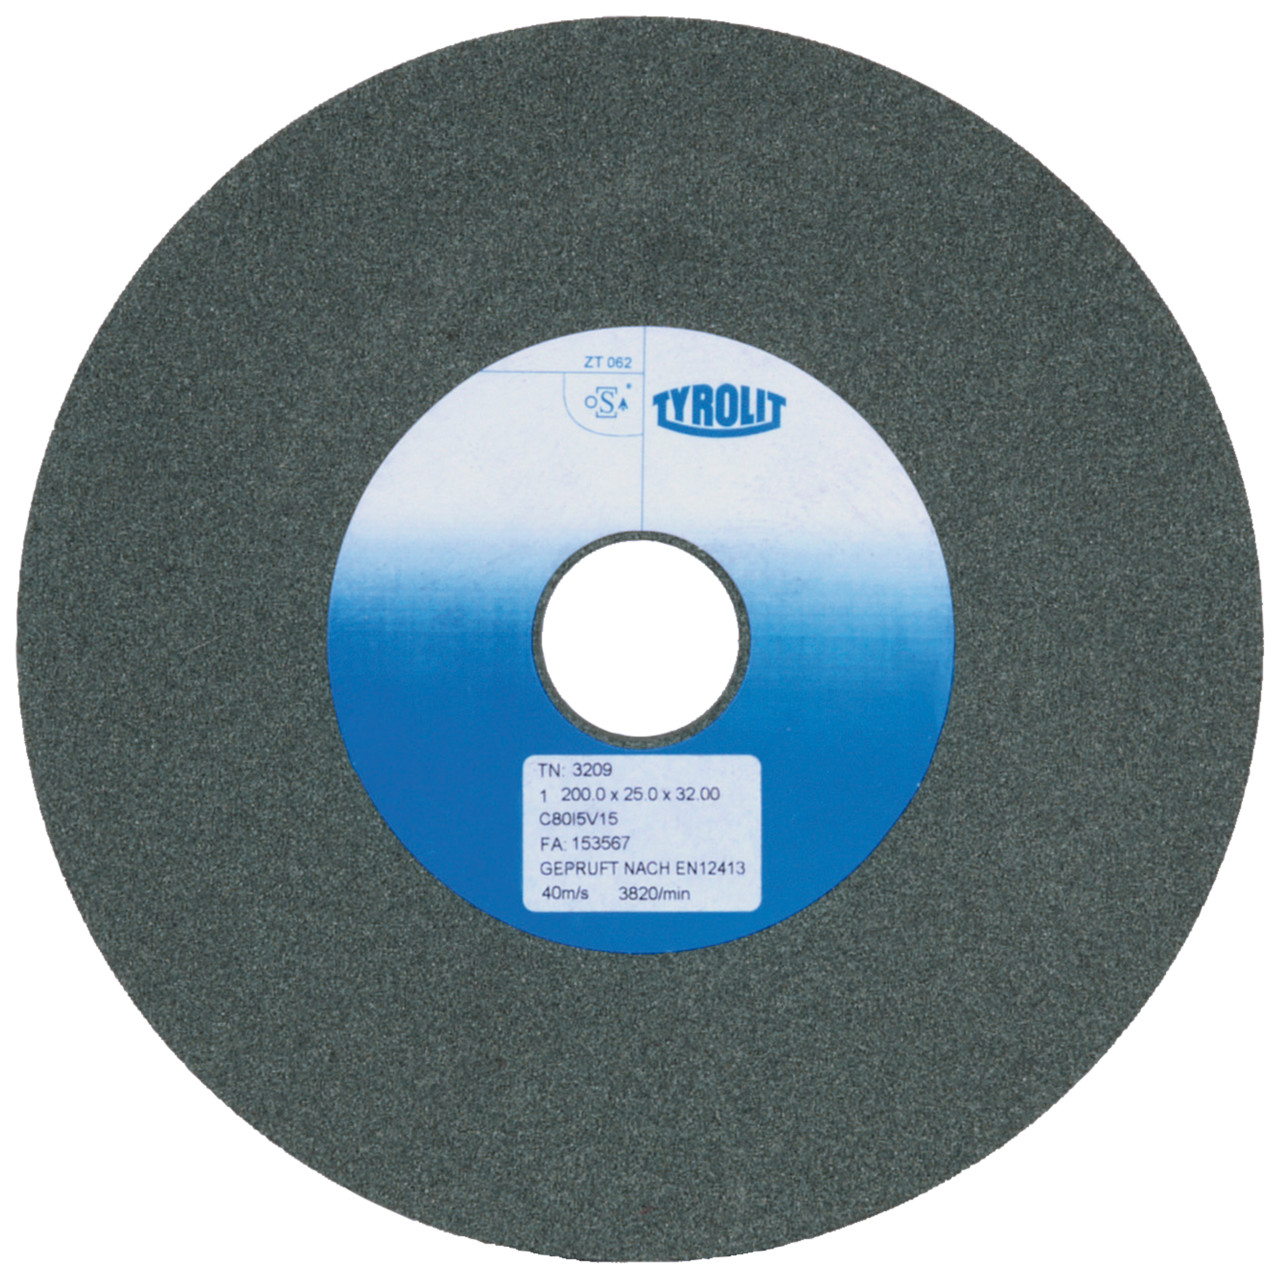 Tyrolit Conventional ceramic grinding discs DxDxH 250x32x32 For carbide and cast iron, shape: 1, Art. 58964